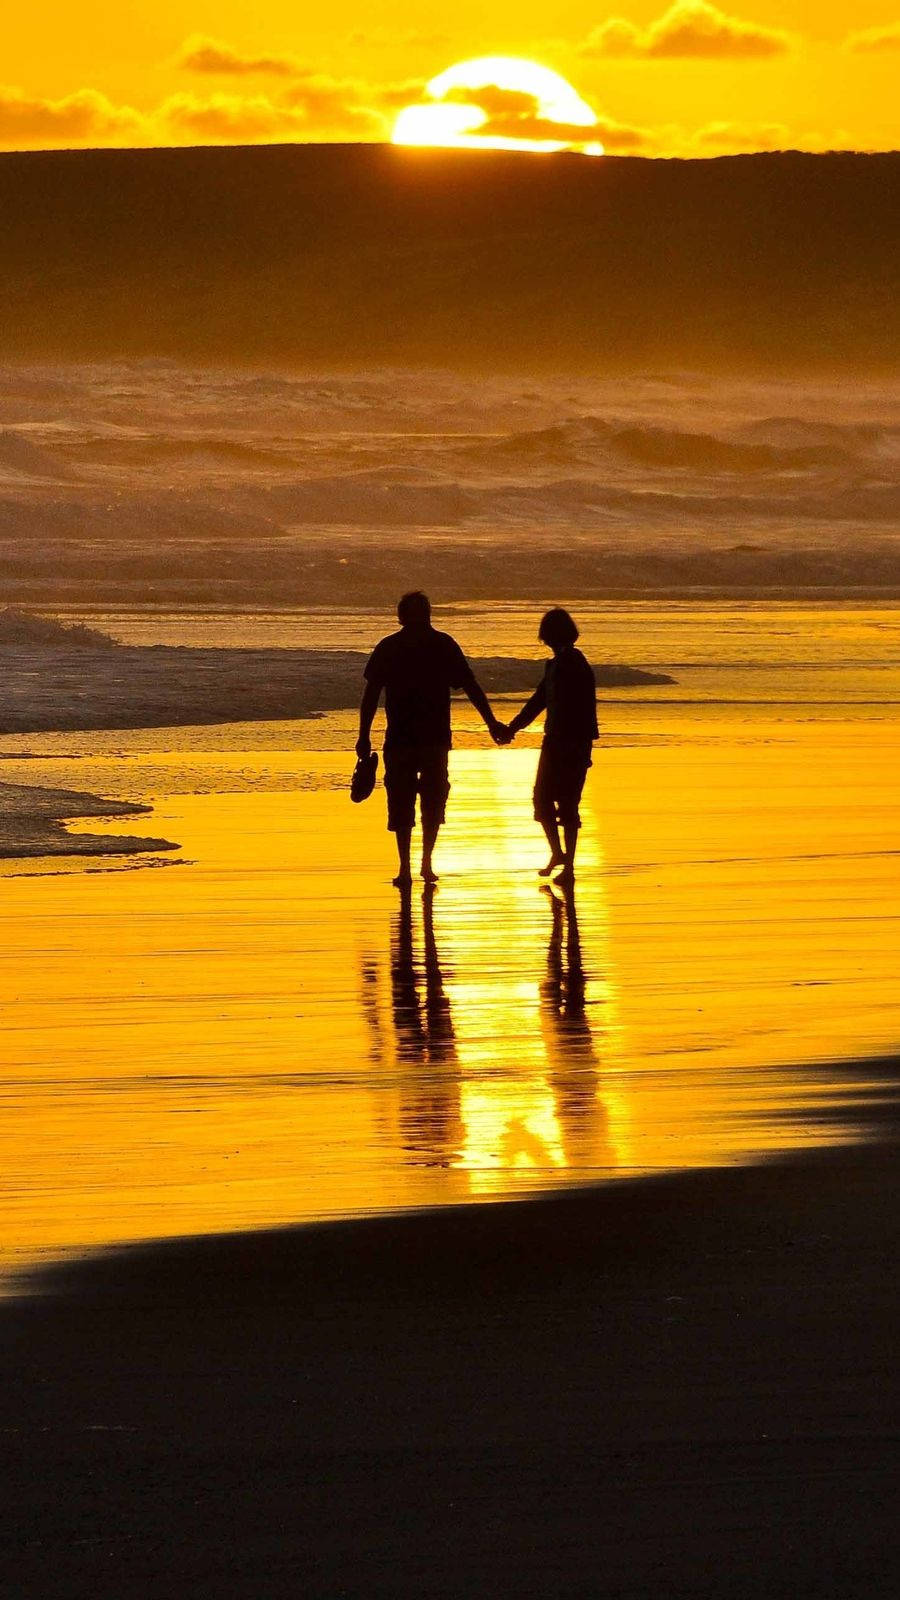 Holding Hands At Sunset On The Beach Wallpaper